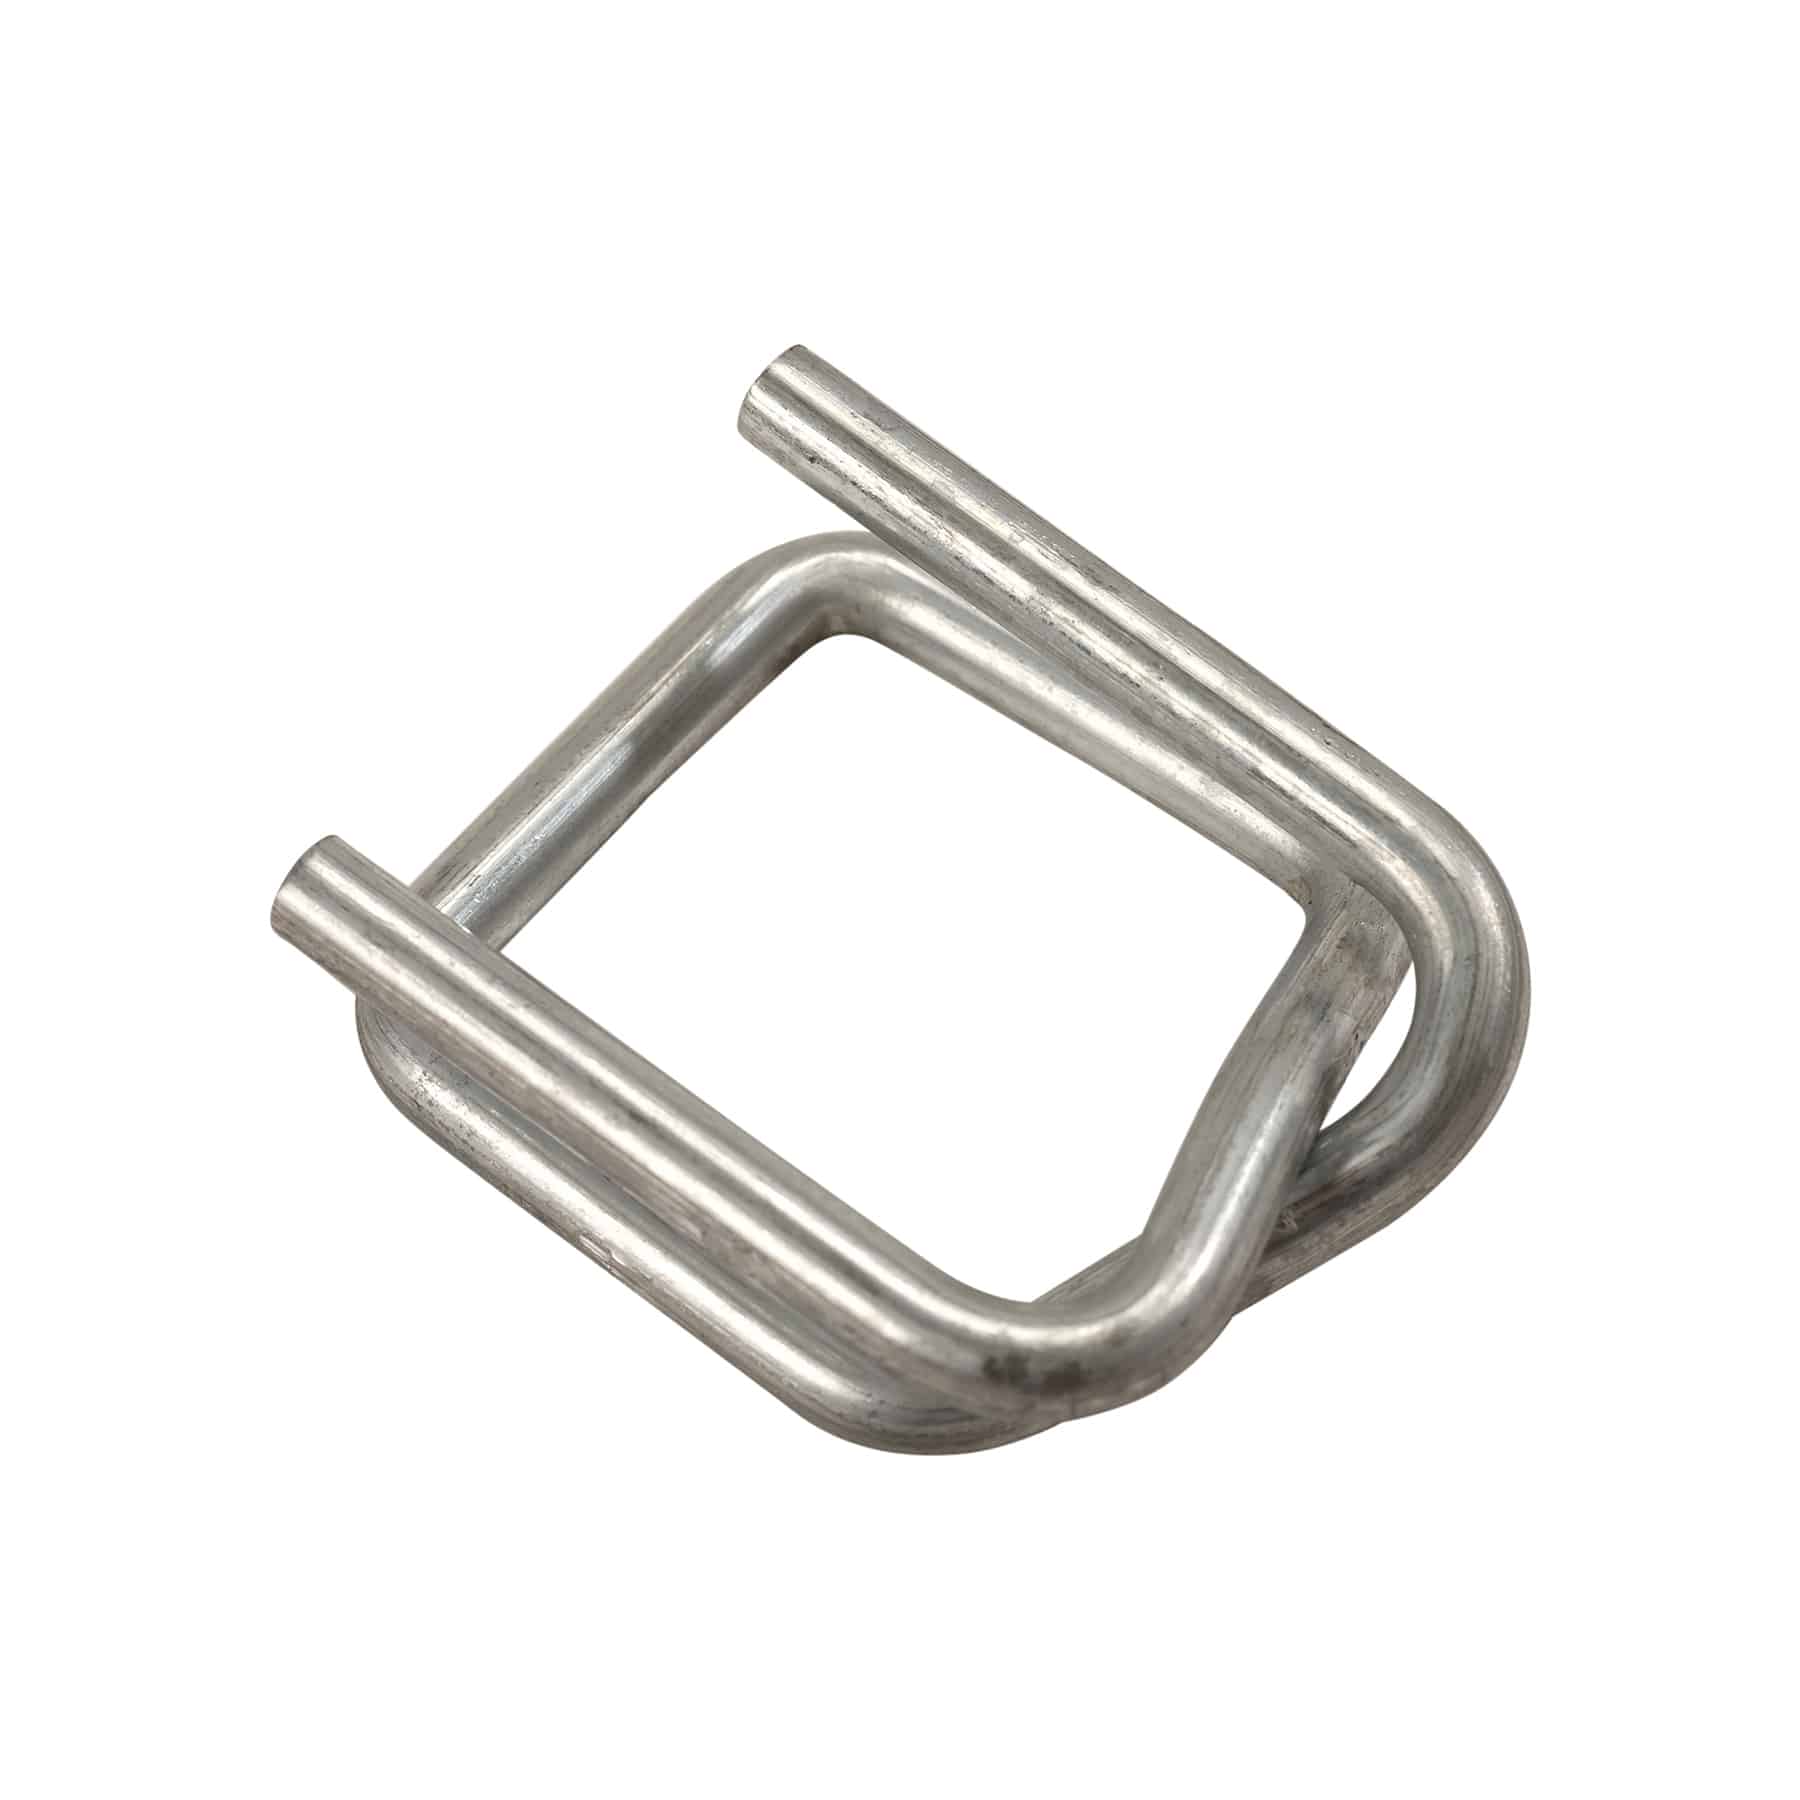 25mm Galvanised Strapping Buckles